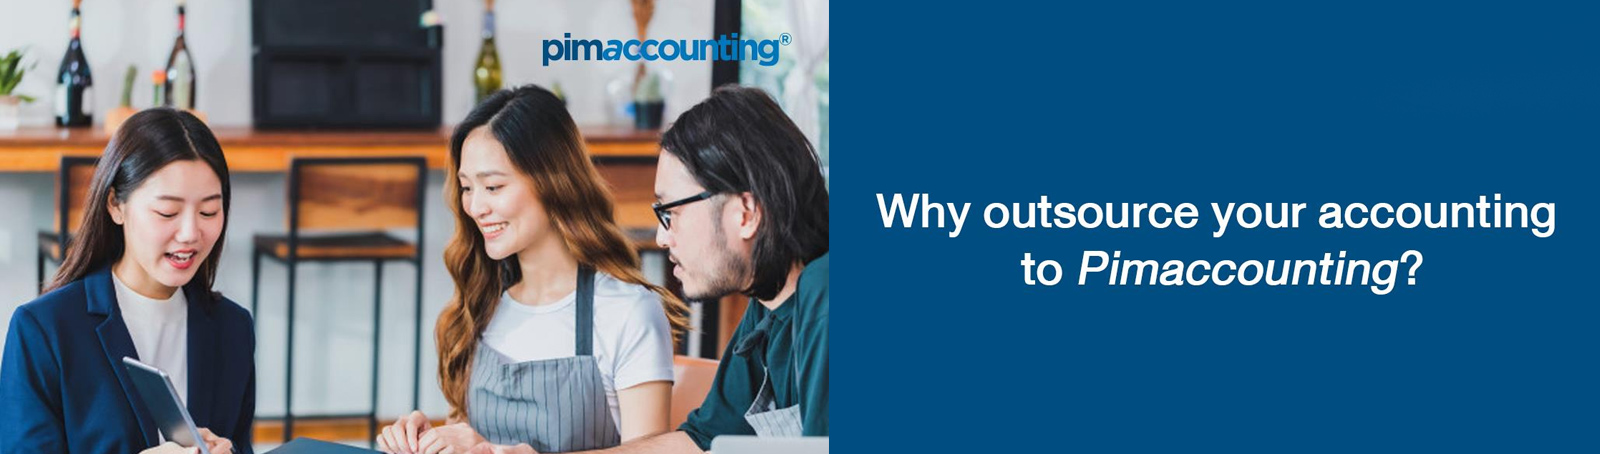 Why outsource your accounting to Pimaccounting?